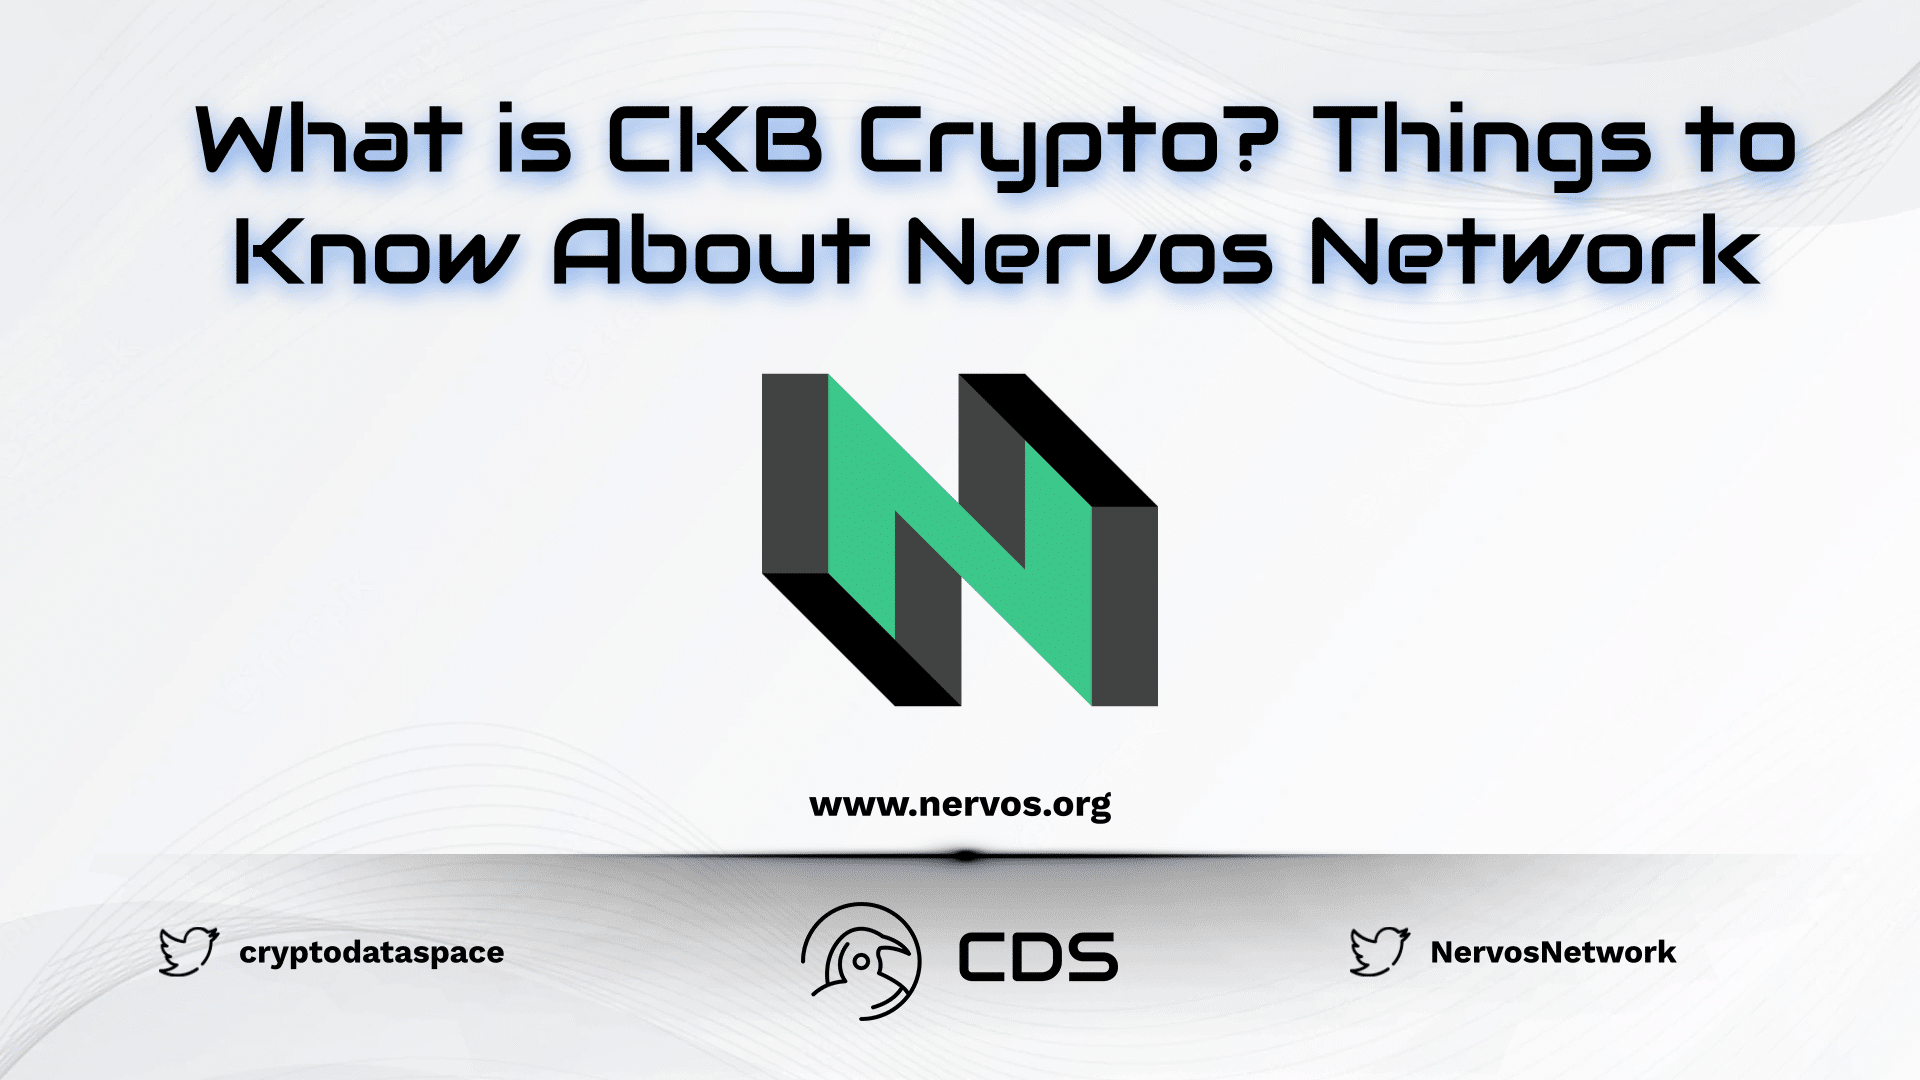 What is CKB Crypto Things to Know About Nervos Network